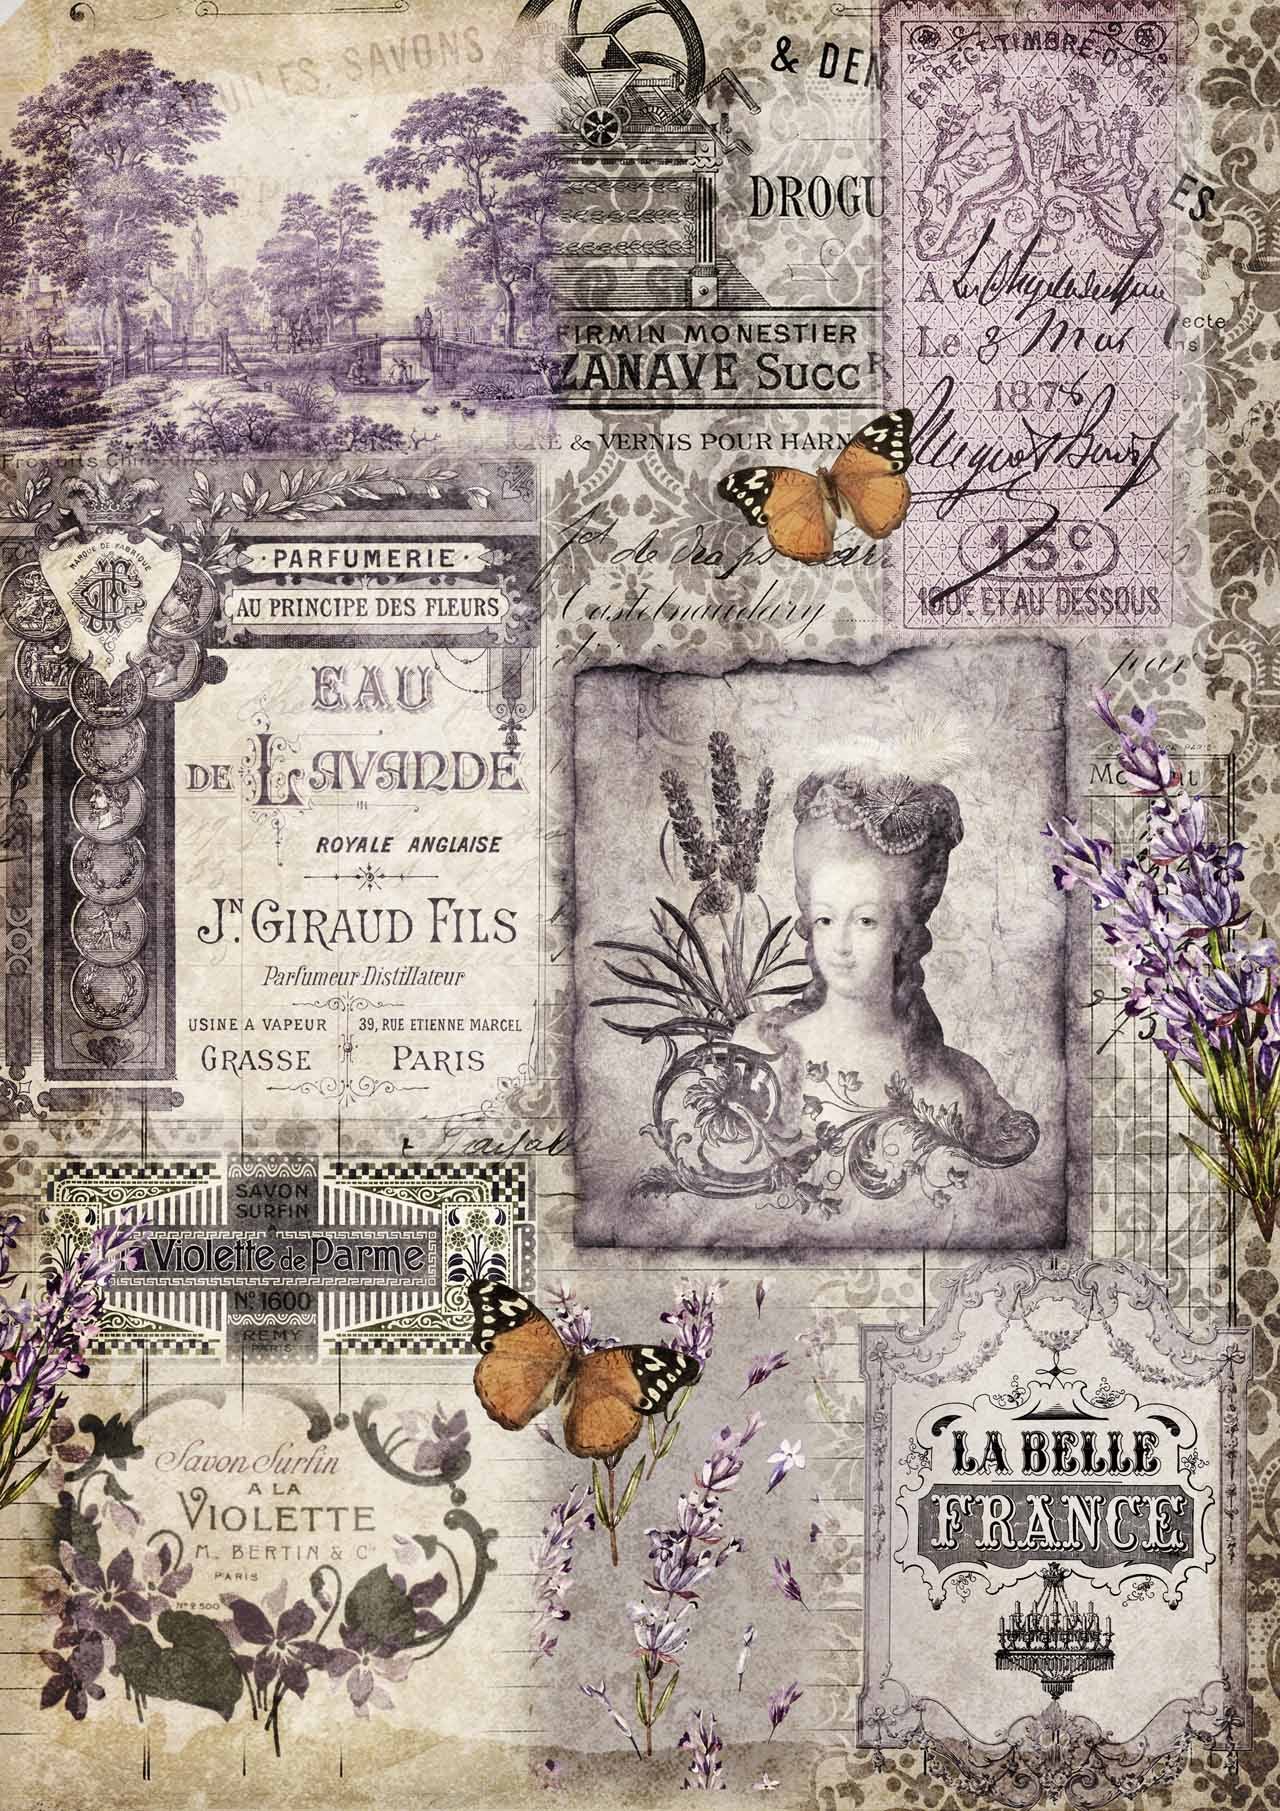 DECOUPAGE QUEEN DECOUPAGE PAPERS - HUMMINGBIRD SONG 0119 – 2ChattyChicks